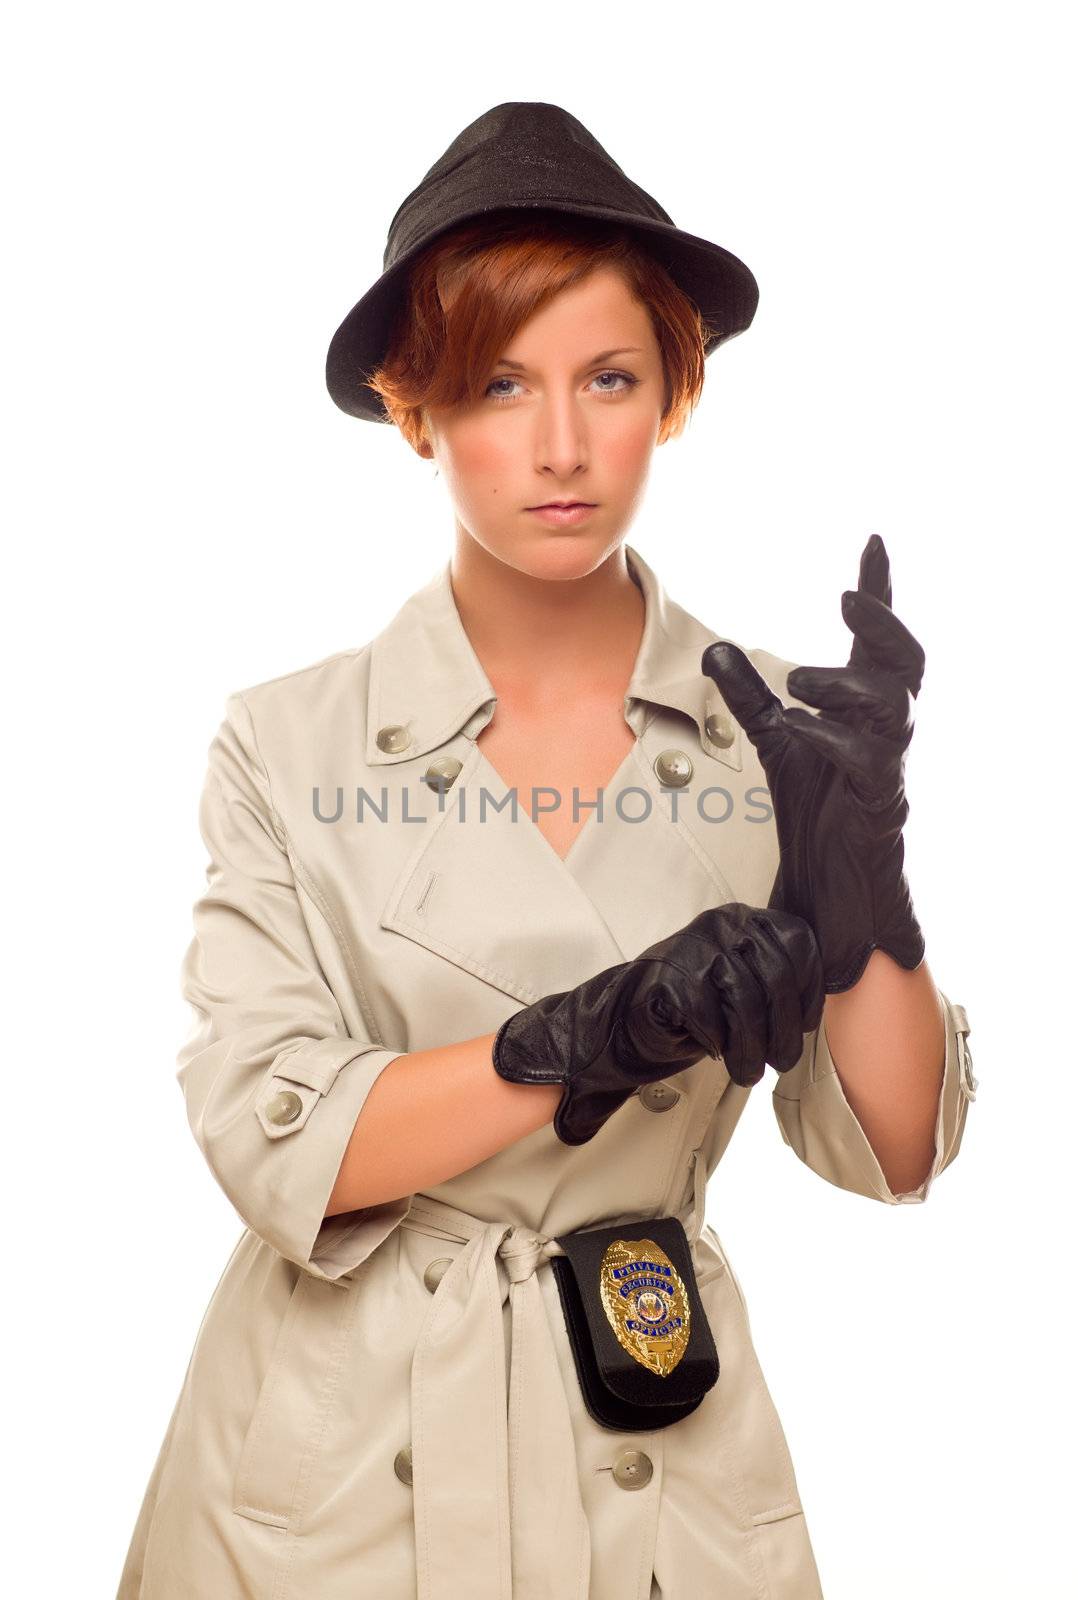 Female Detective With Badge and Gloves In Trench Coat on White by Feverpitched